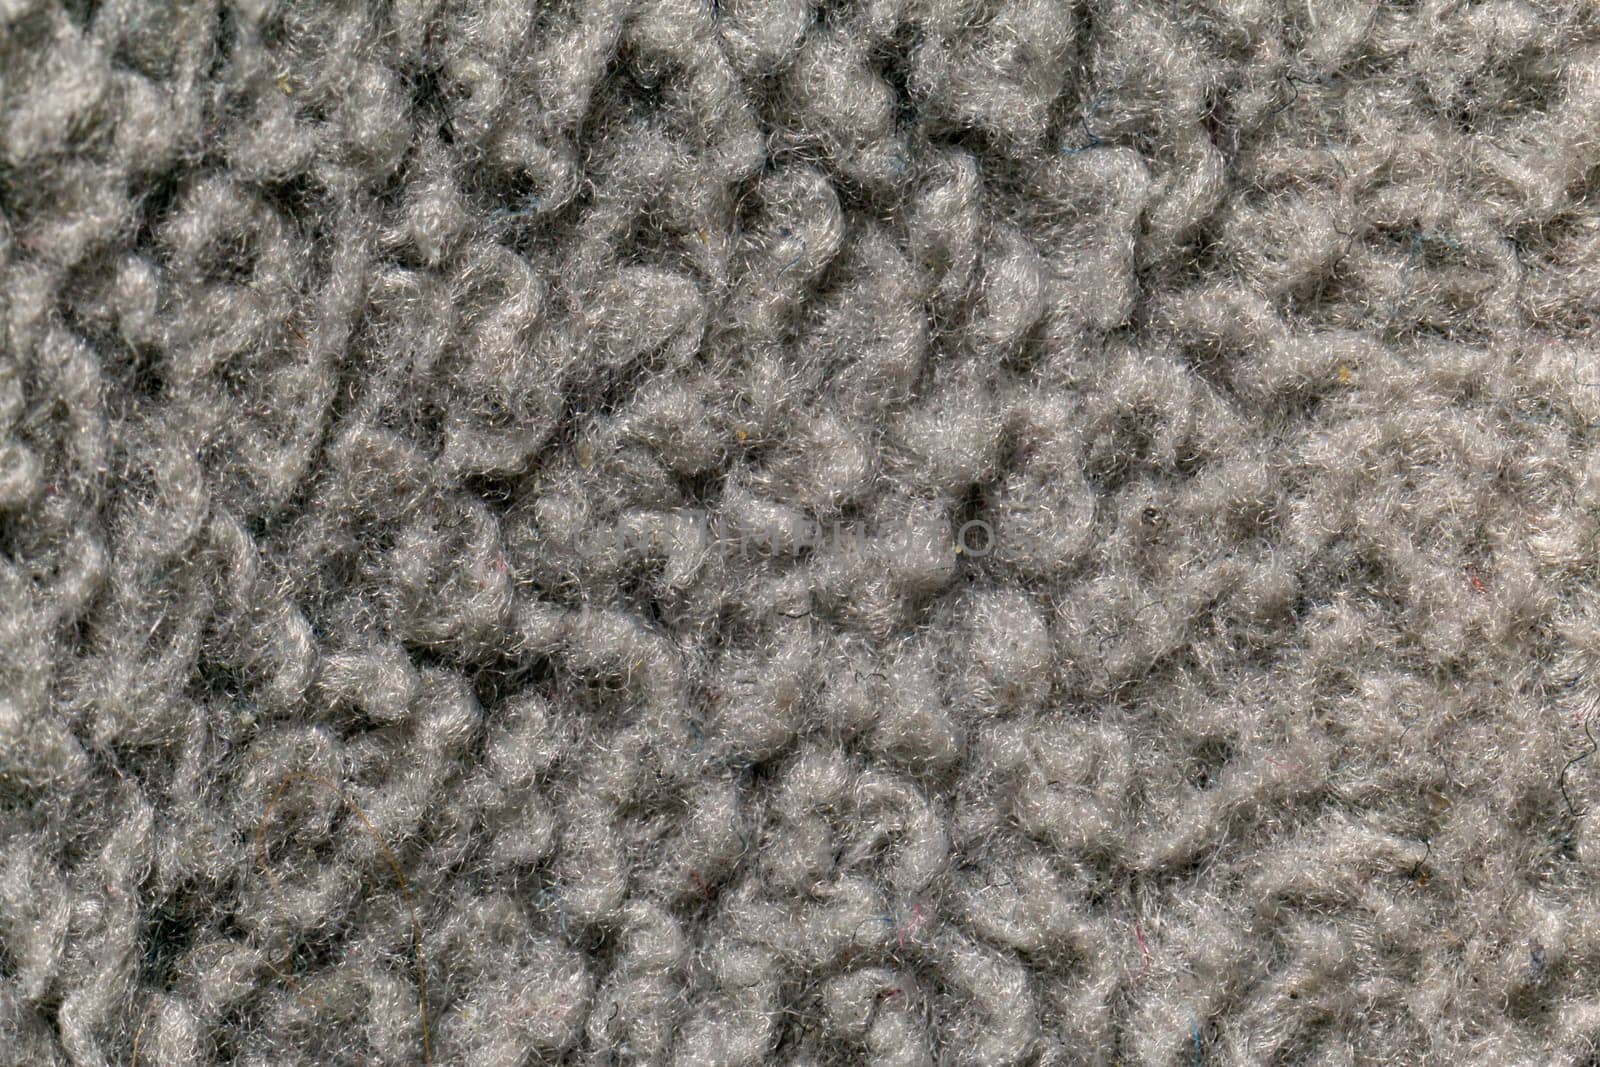 Gray fabric texture, terry cloth, extreme close-up view